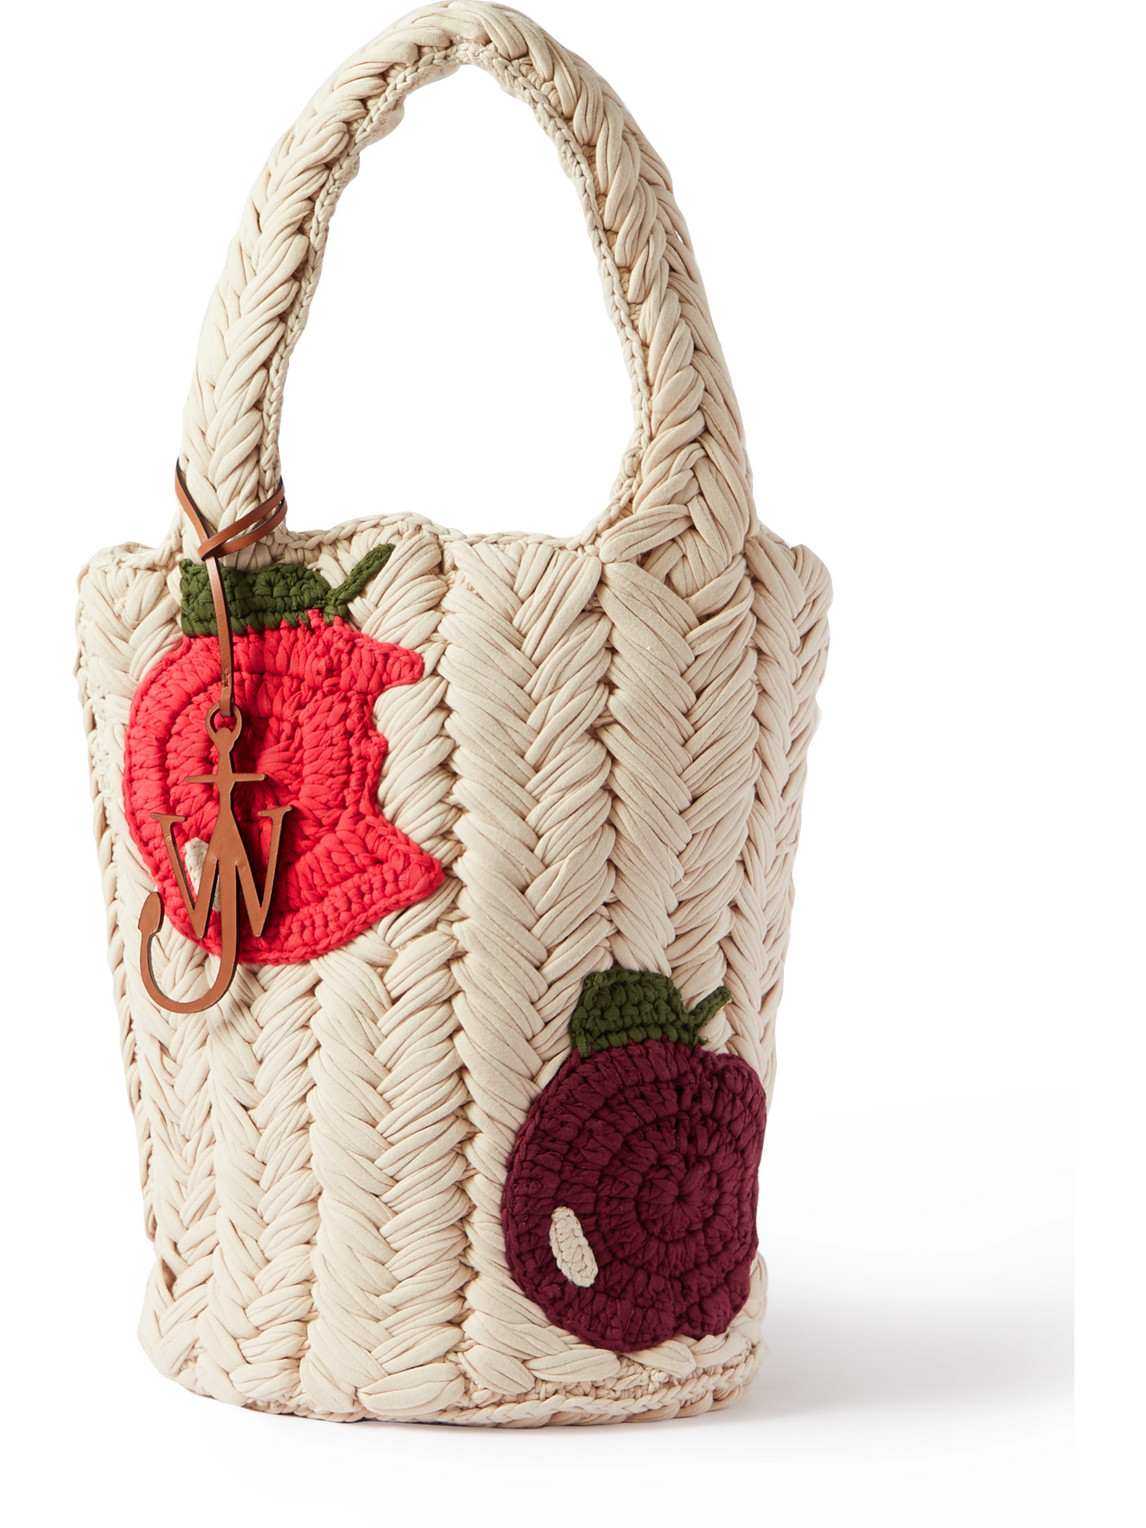 JW ANDERSON LEATHER-TRIMMED CROCHET-KNIT ORGANIC COTTON TOTE BAG